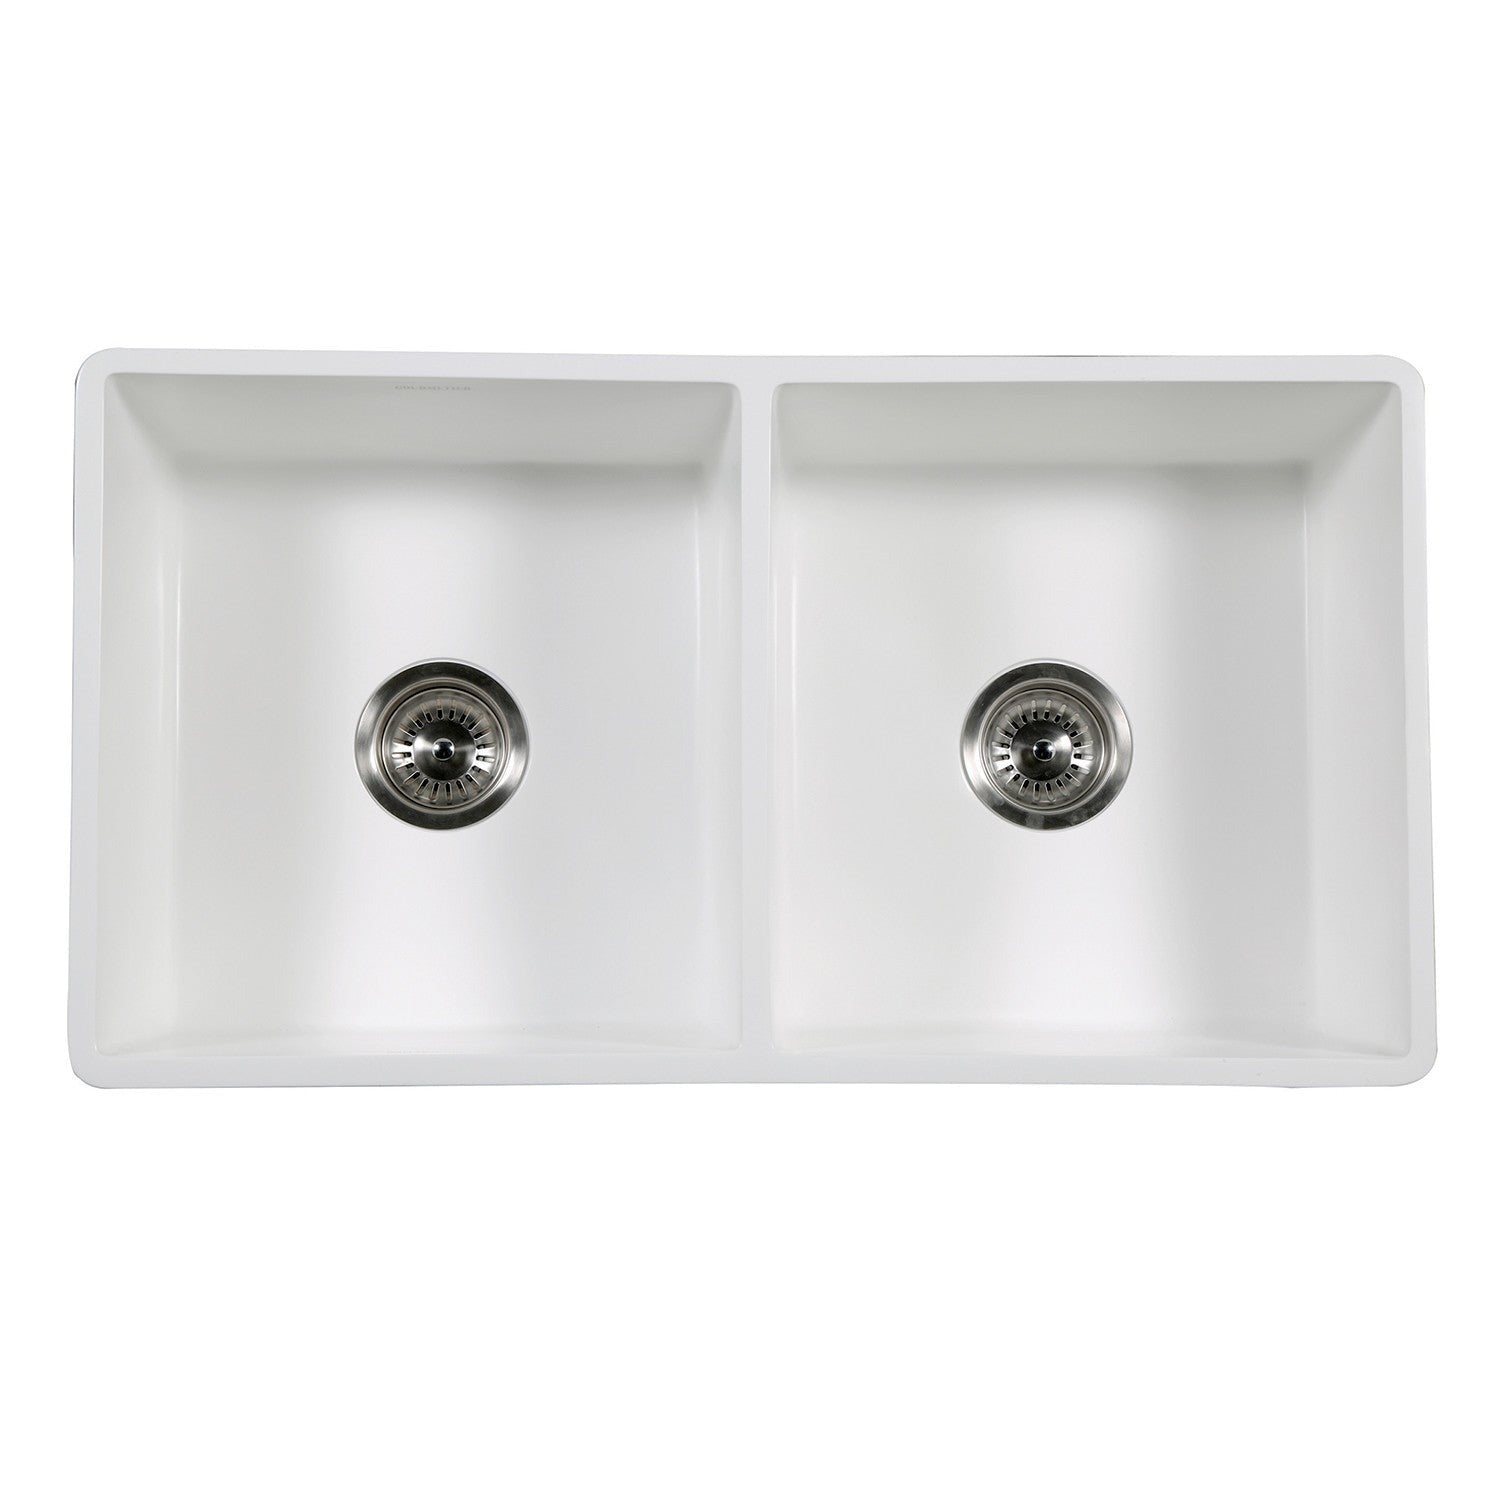 Kingston Brass 33 in. Solid Surface Double Bowl Farmhouse Kitchen Sink, Matte White (GKFA331810BCD)